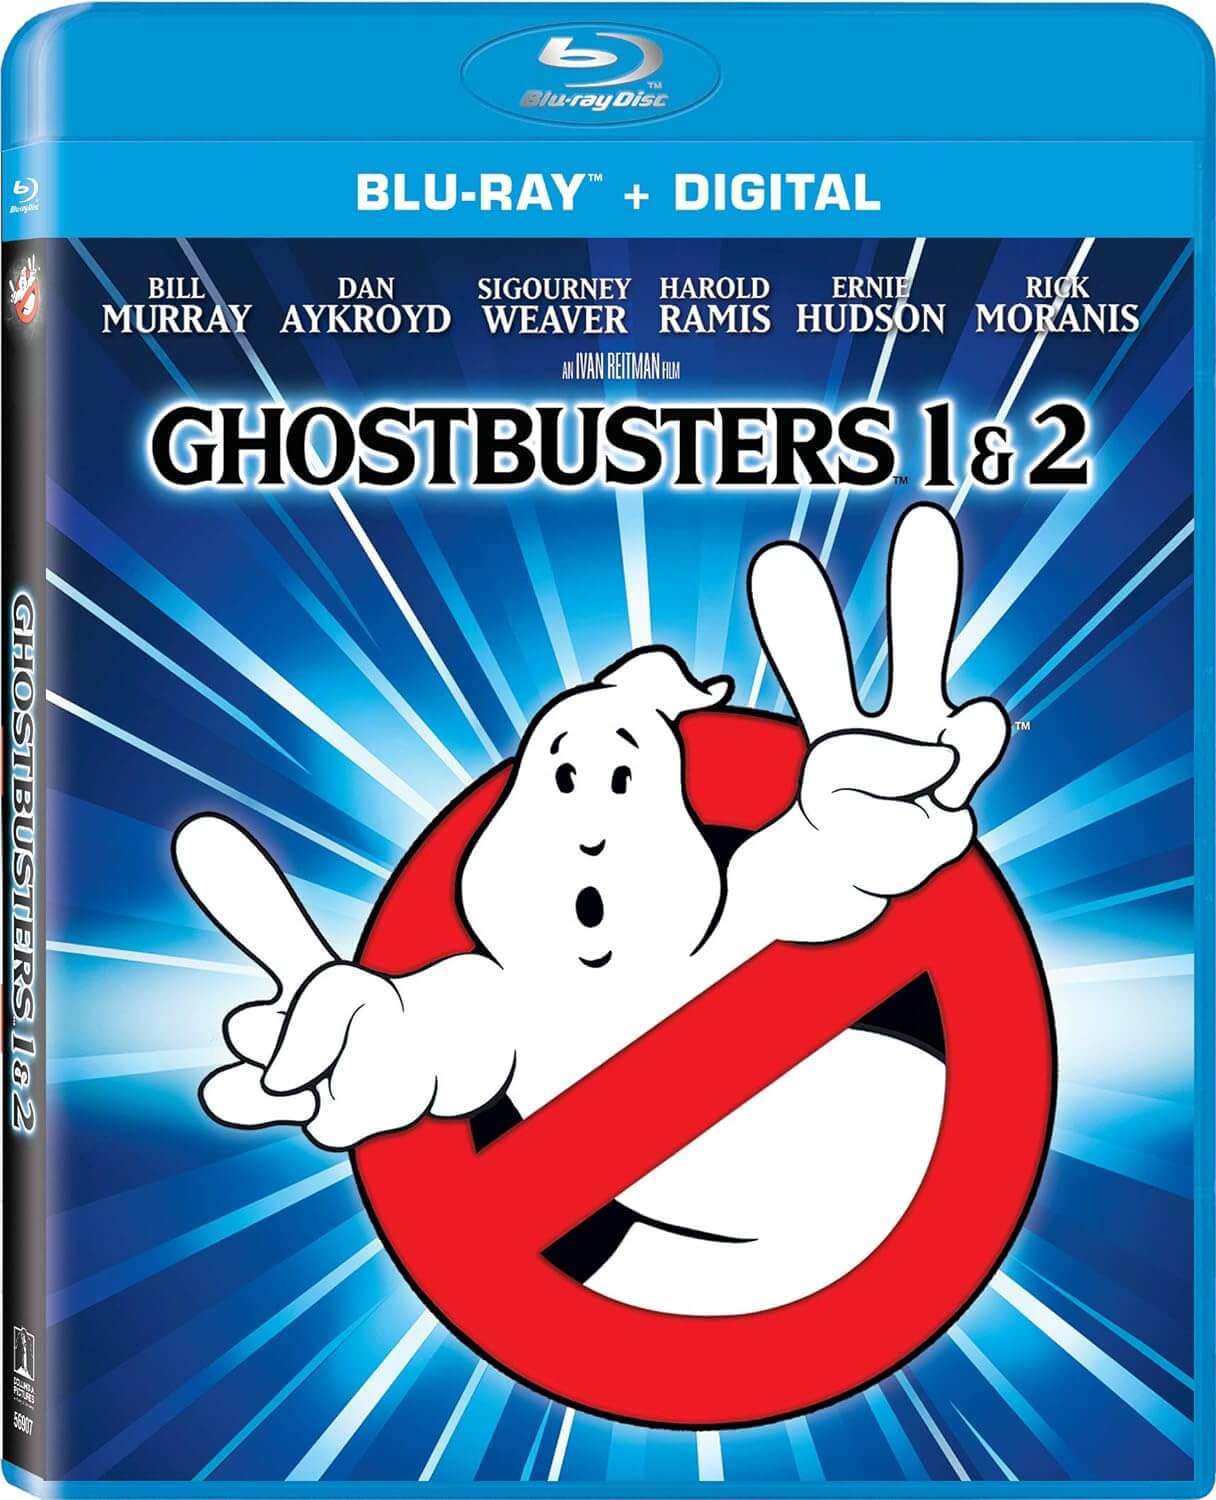 "Ghostbusters" 1 and 2